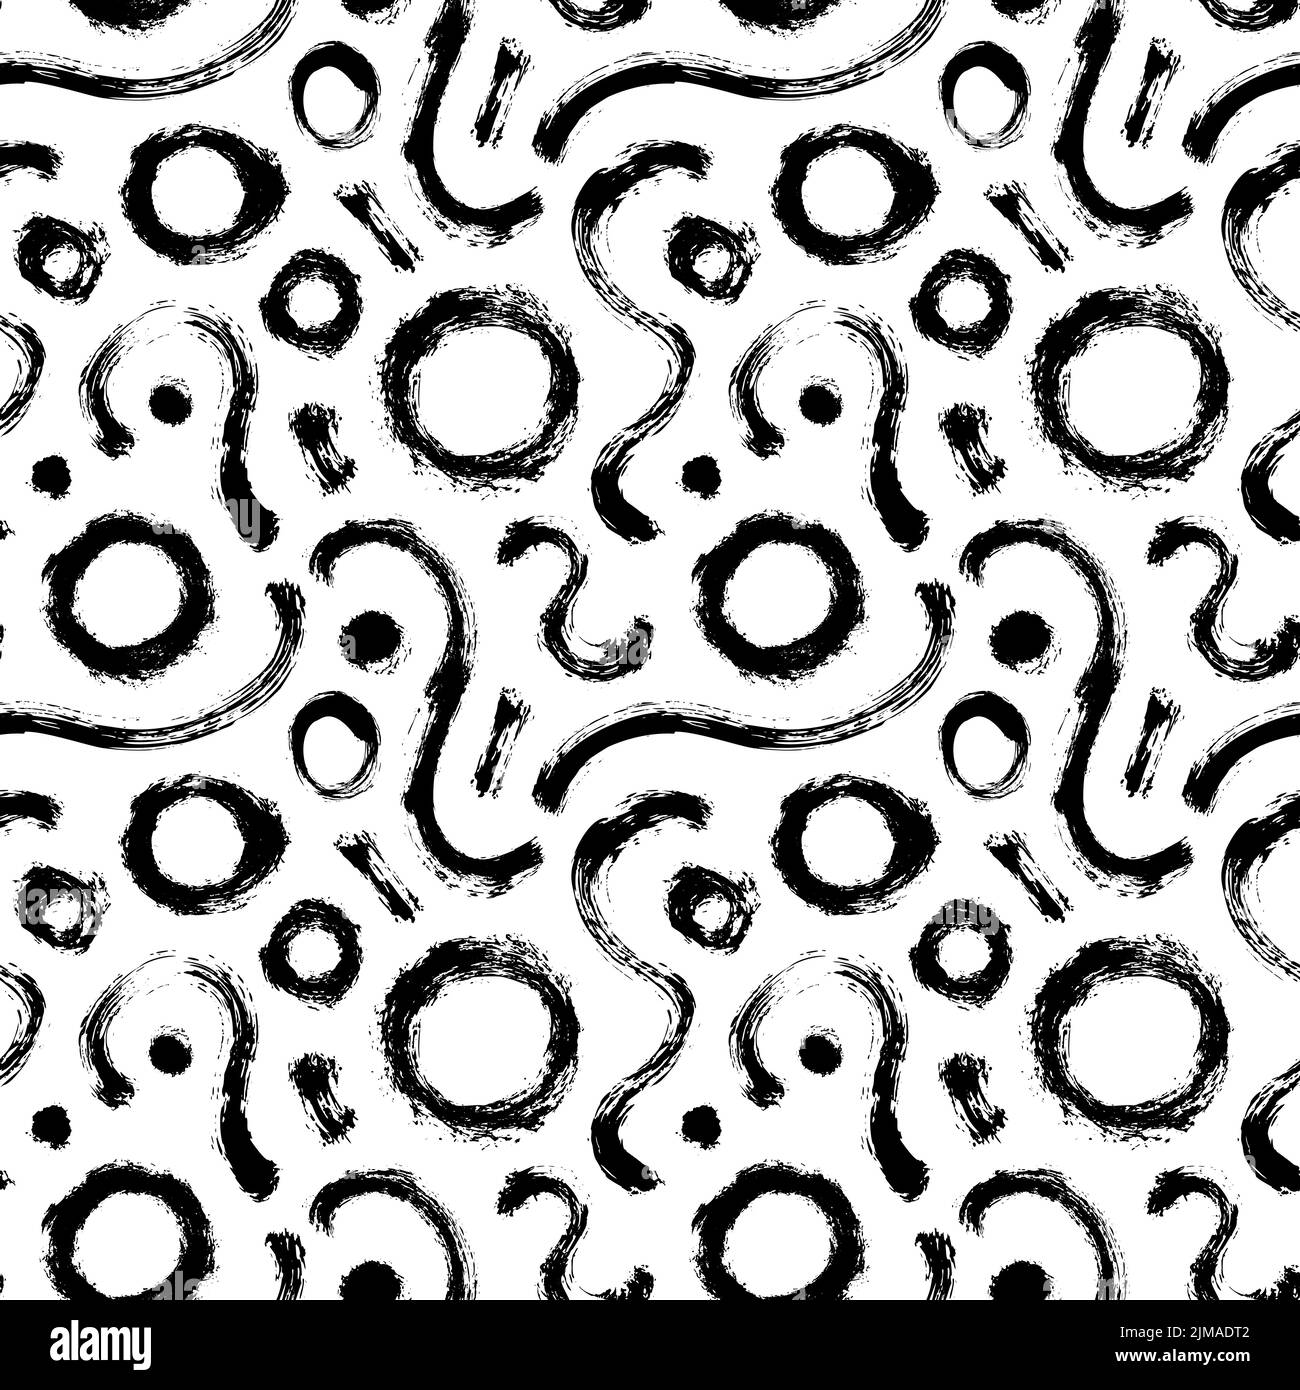 Organic wavy lines and circles seamless pattern. Stock Vector